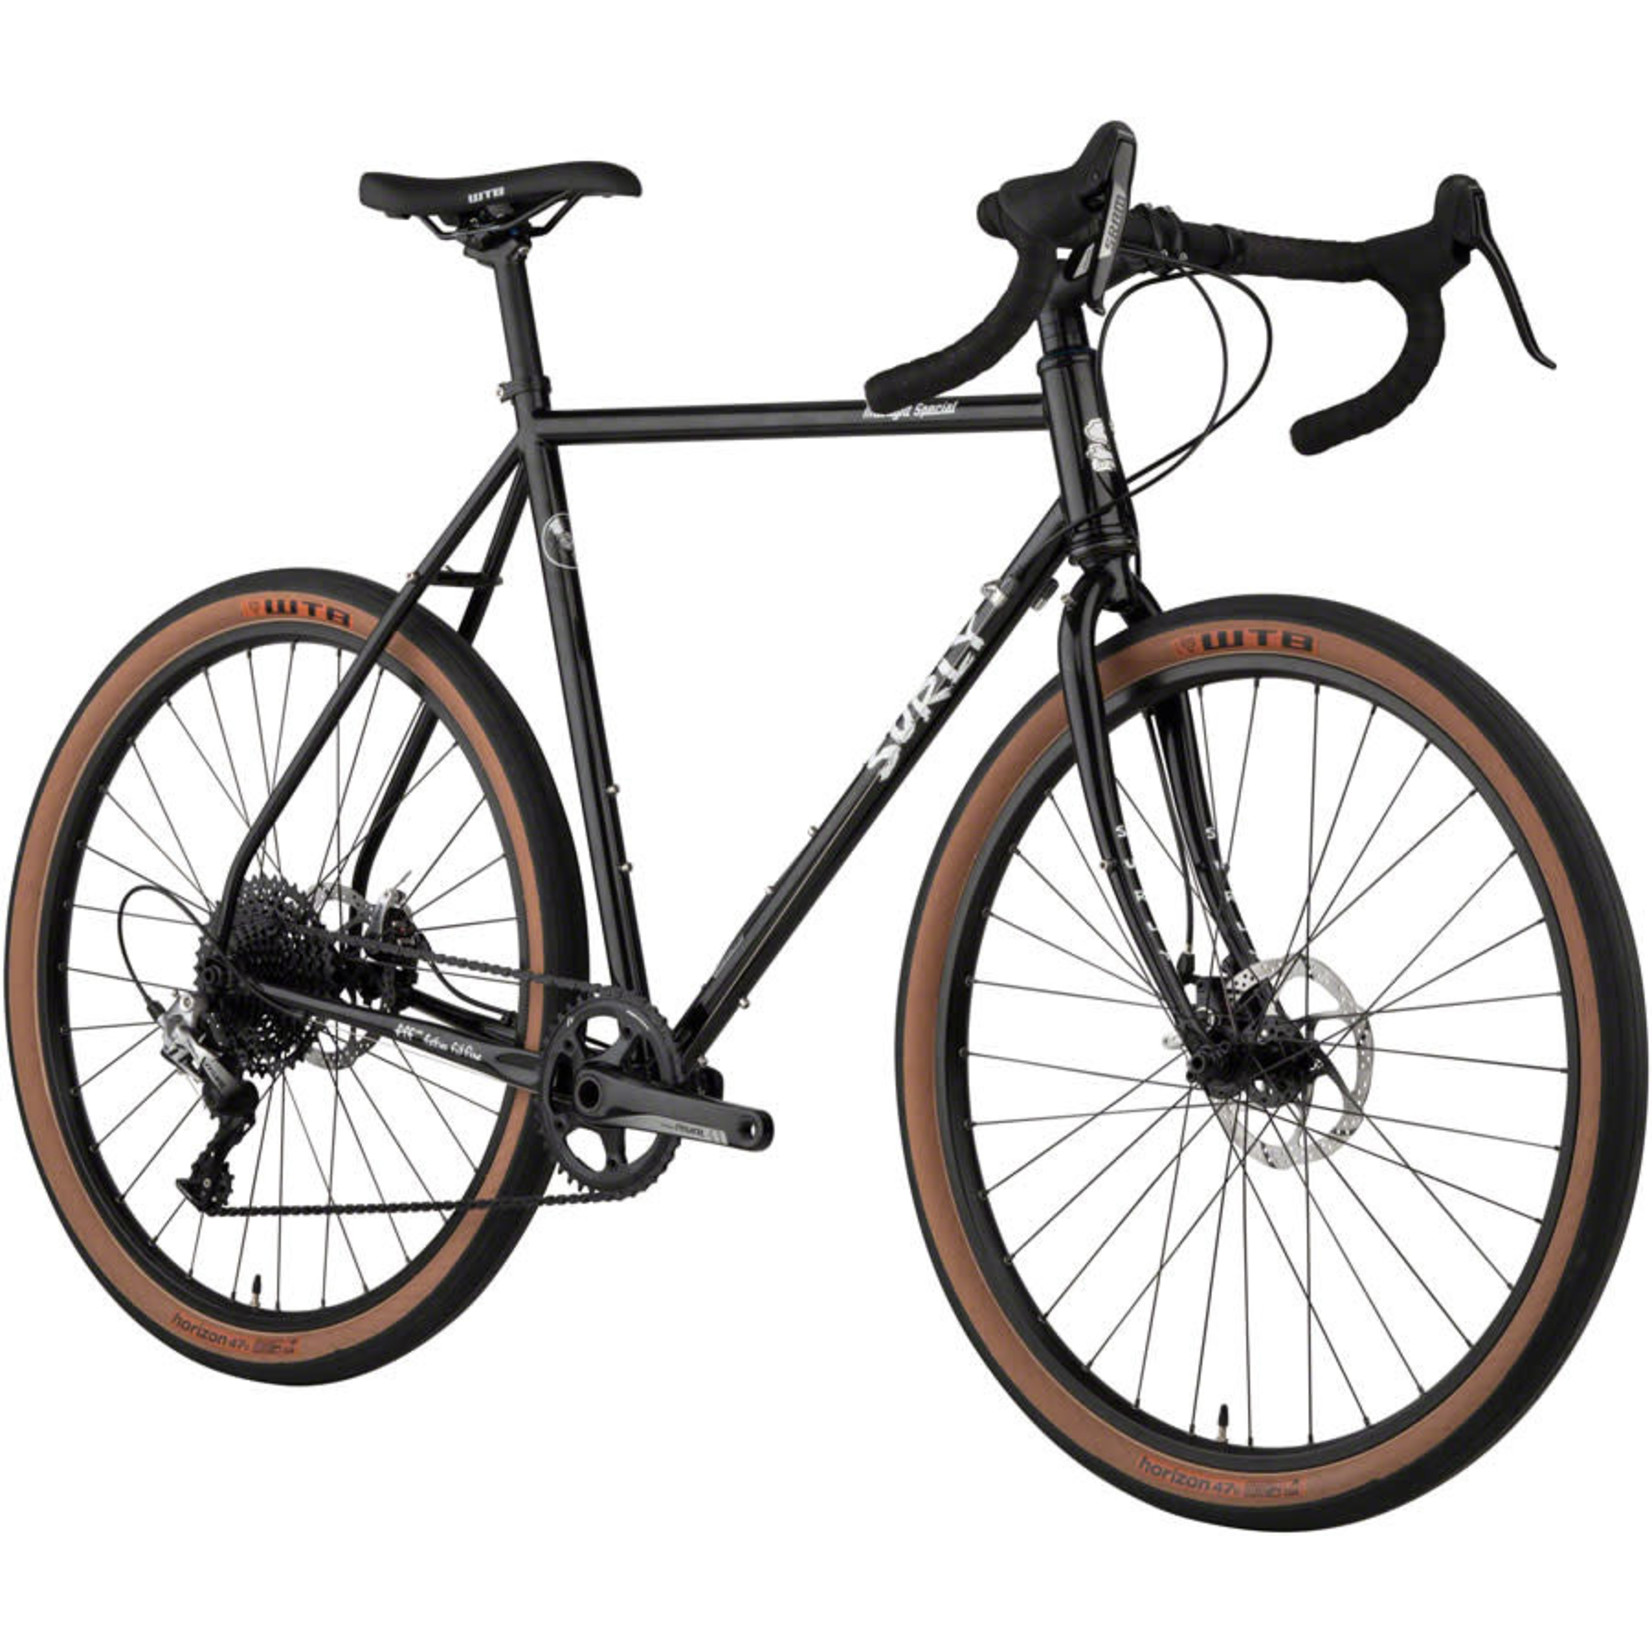 Surly Surly - Midnight Special 650b